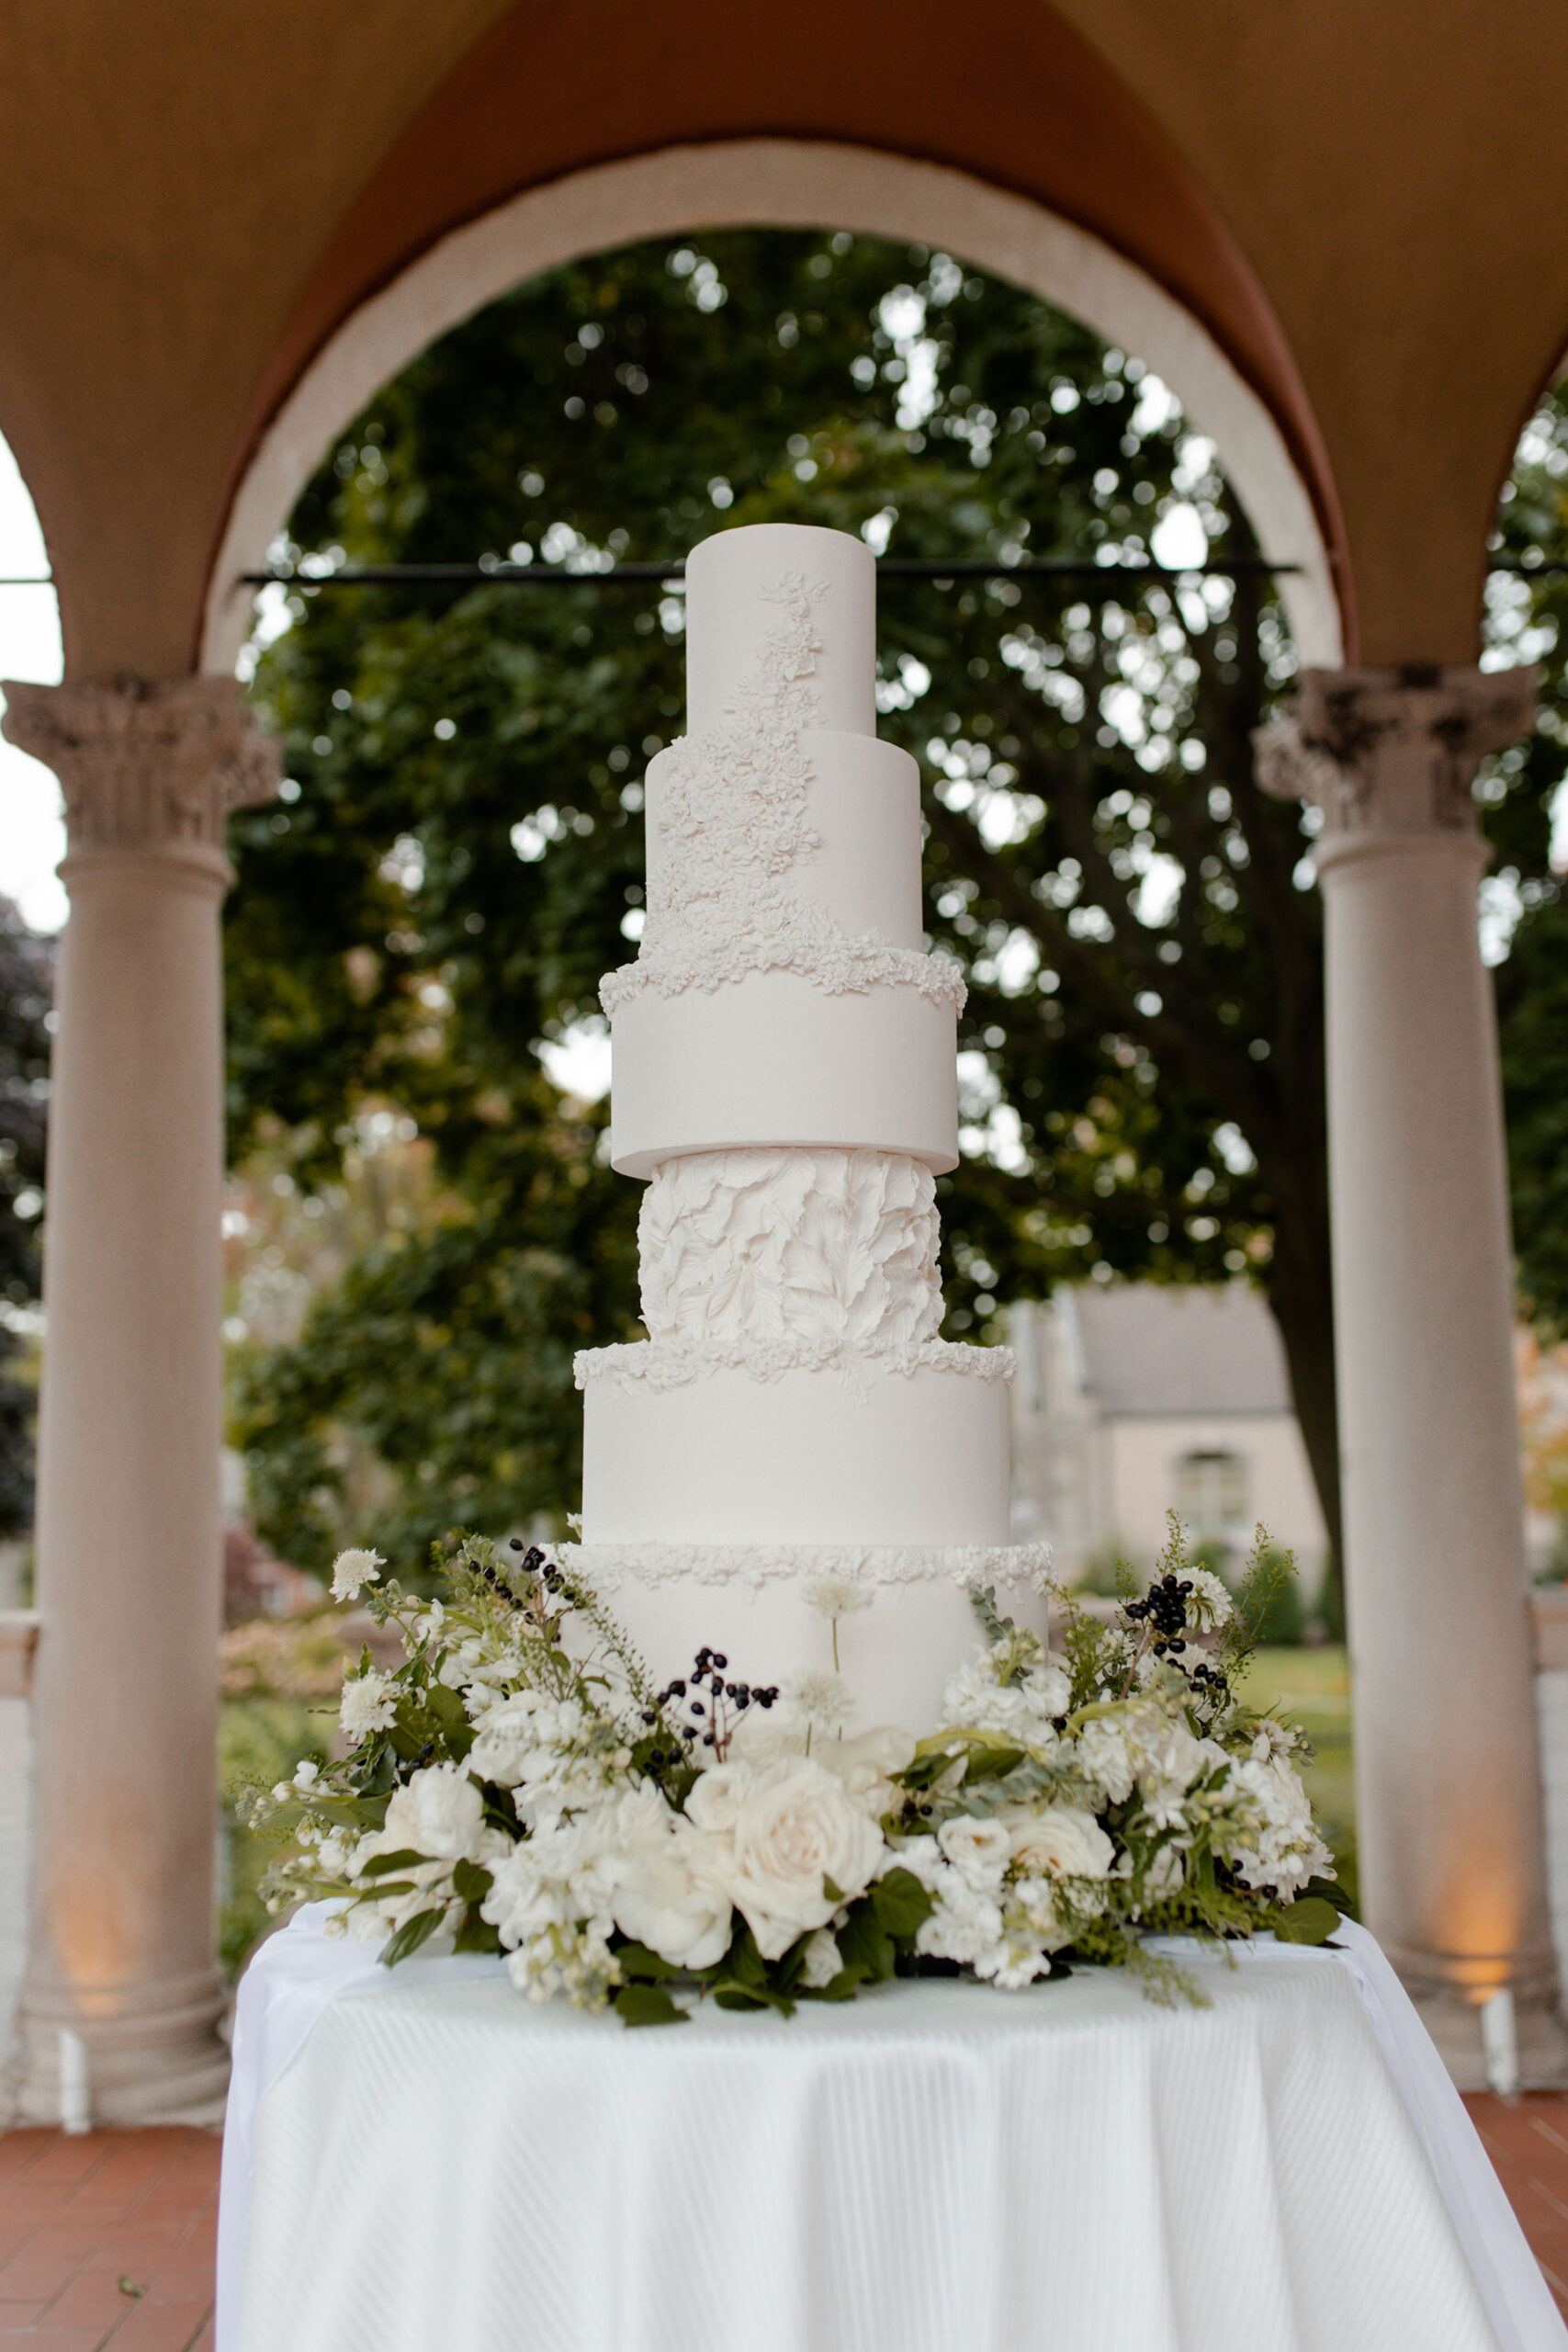 An italian inspired wedding at the Villa Terrace Museum in Milwaukee, WI photographed by Claire Neville Photography.